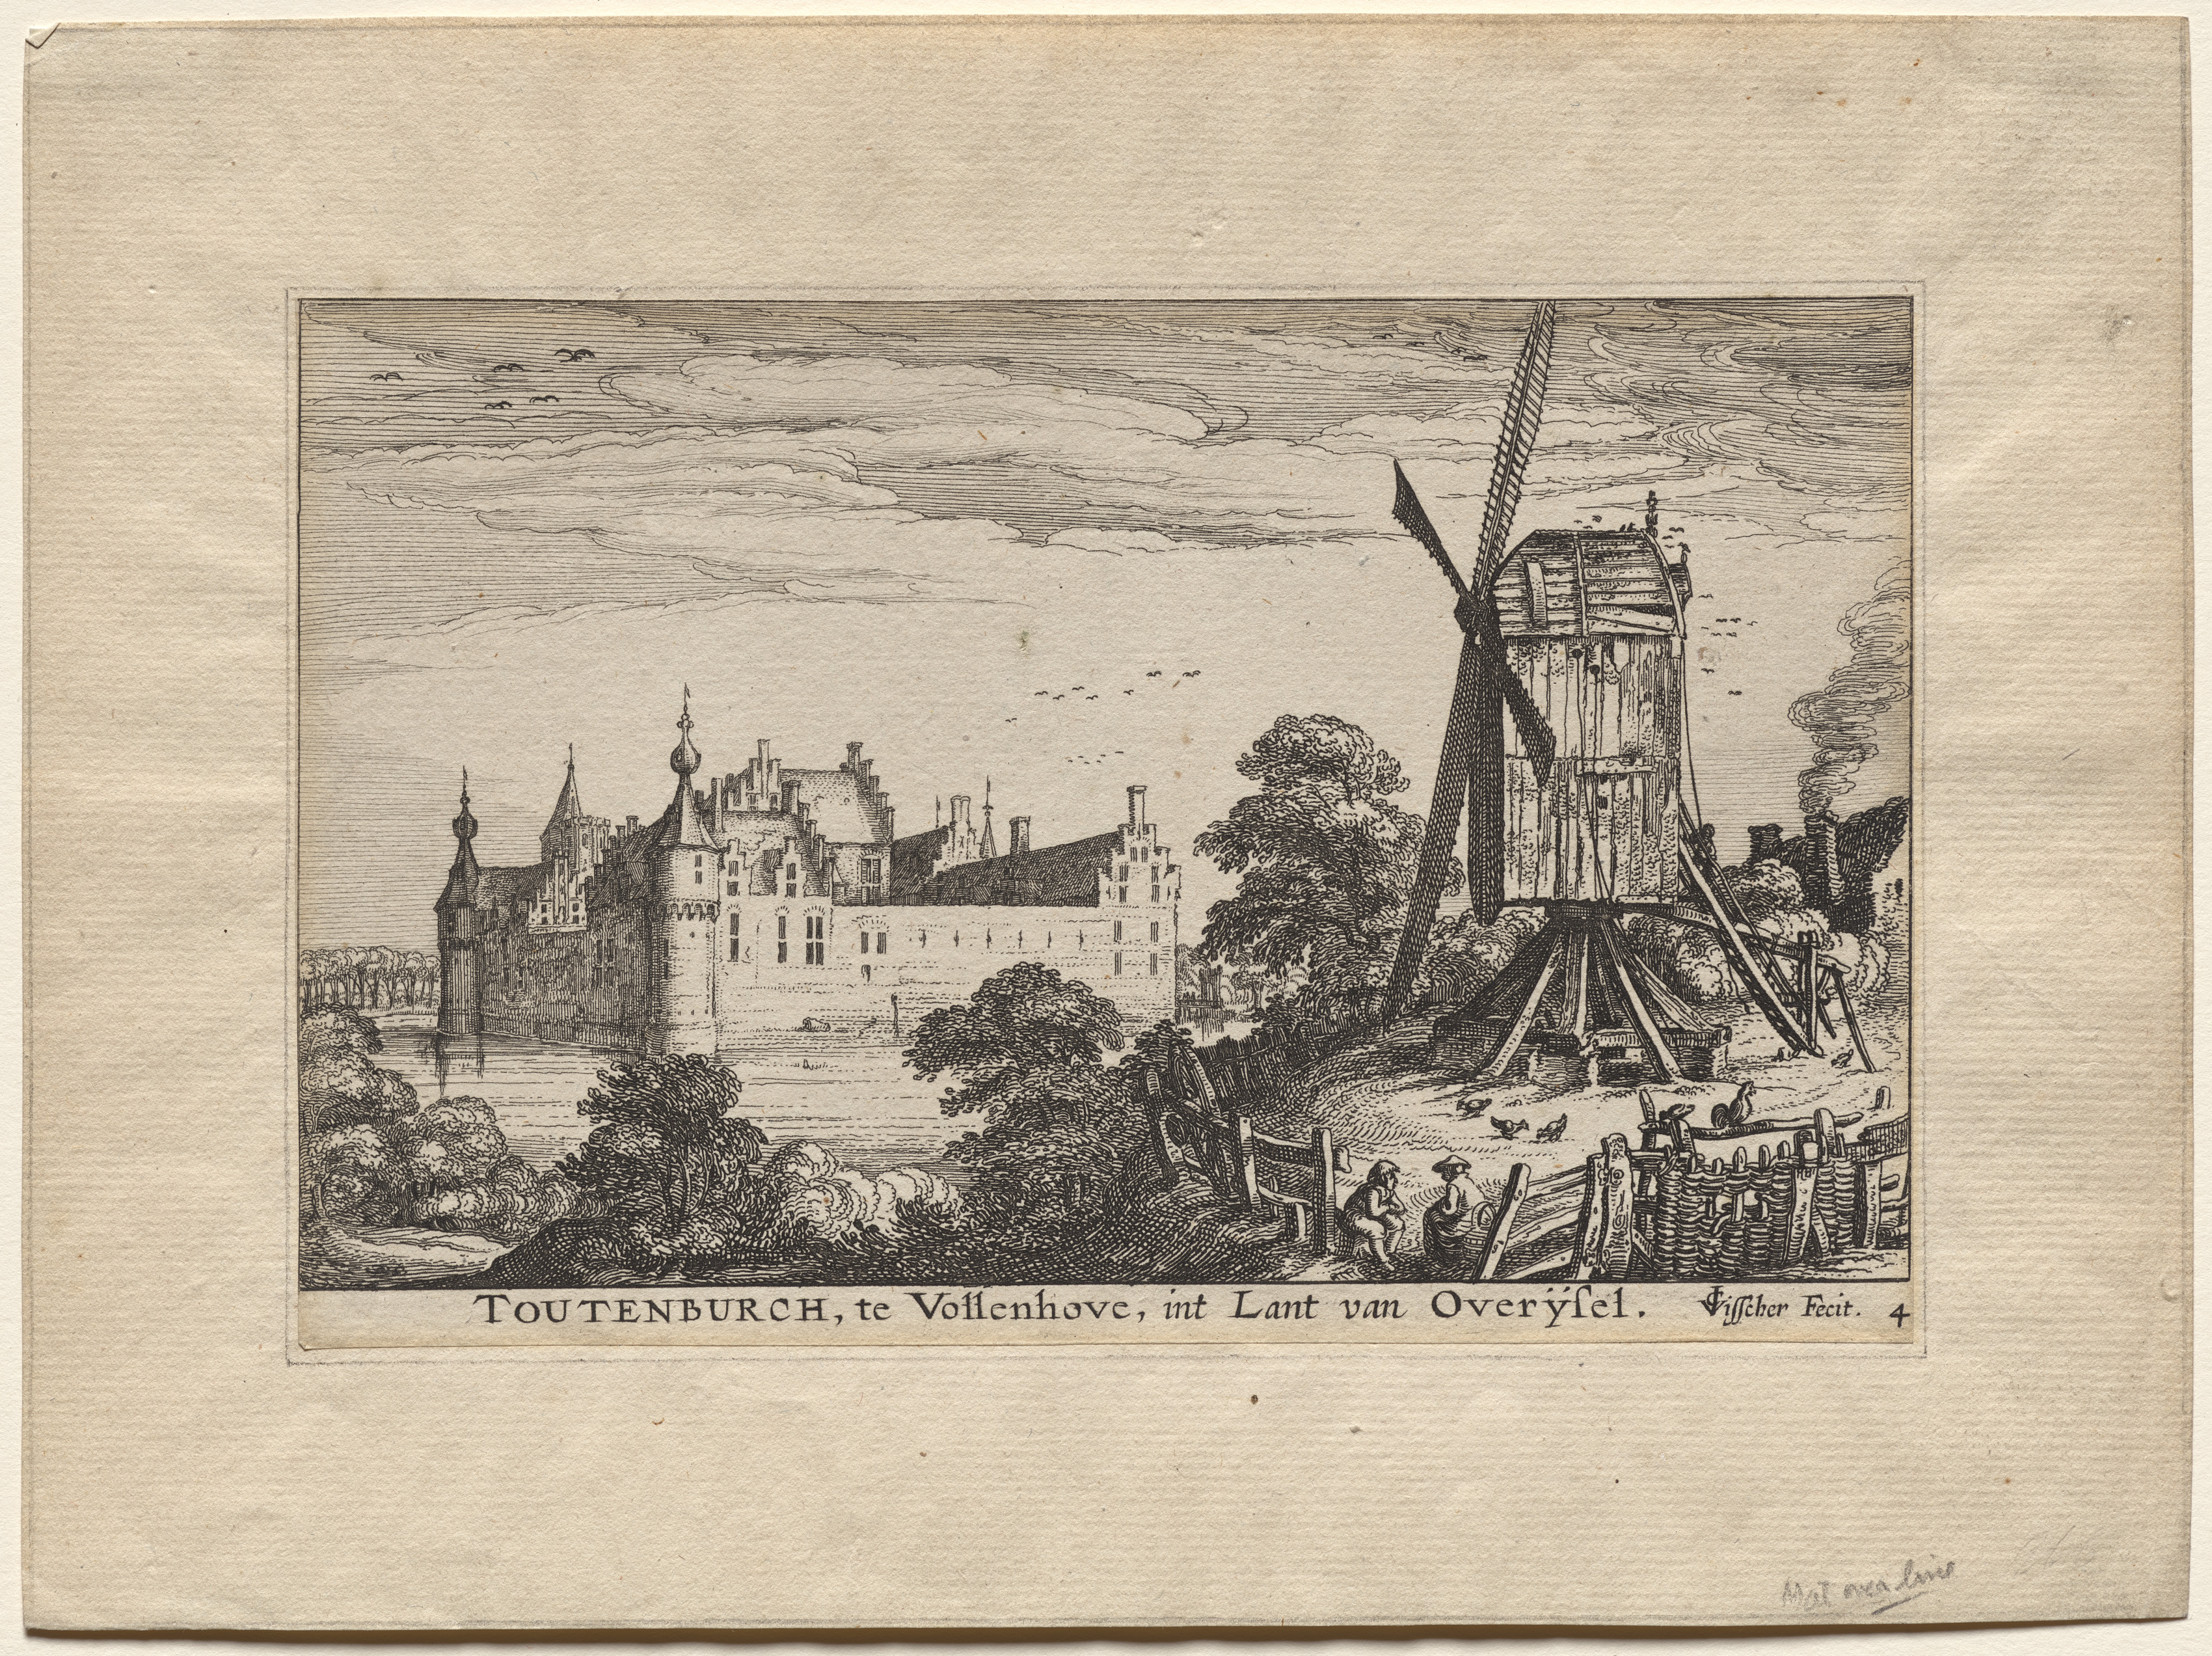 Four Castles in Holland and Utrecht:  The Castle Toutenburgh in Vollenhove